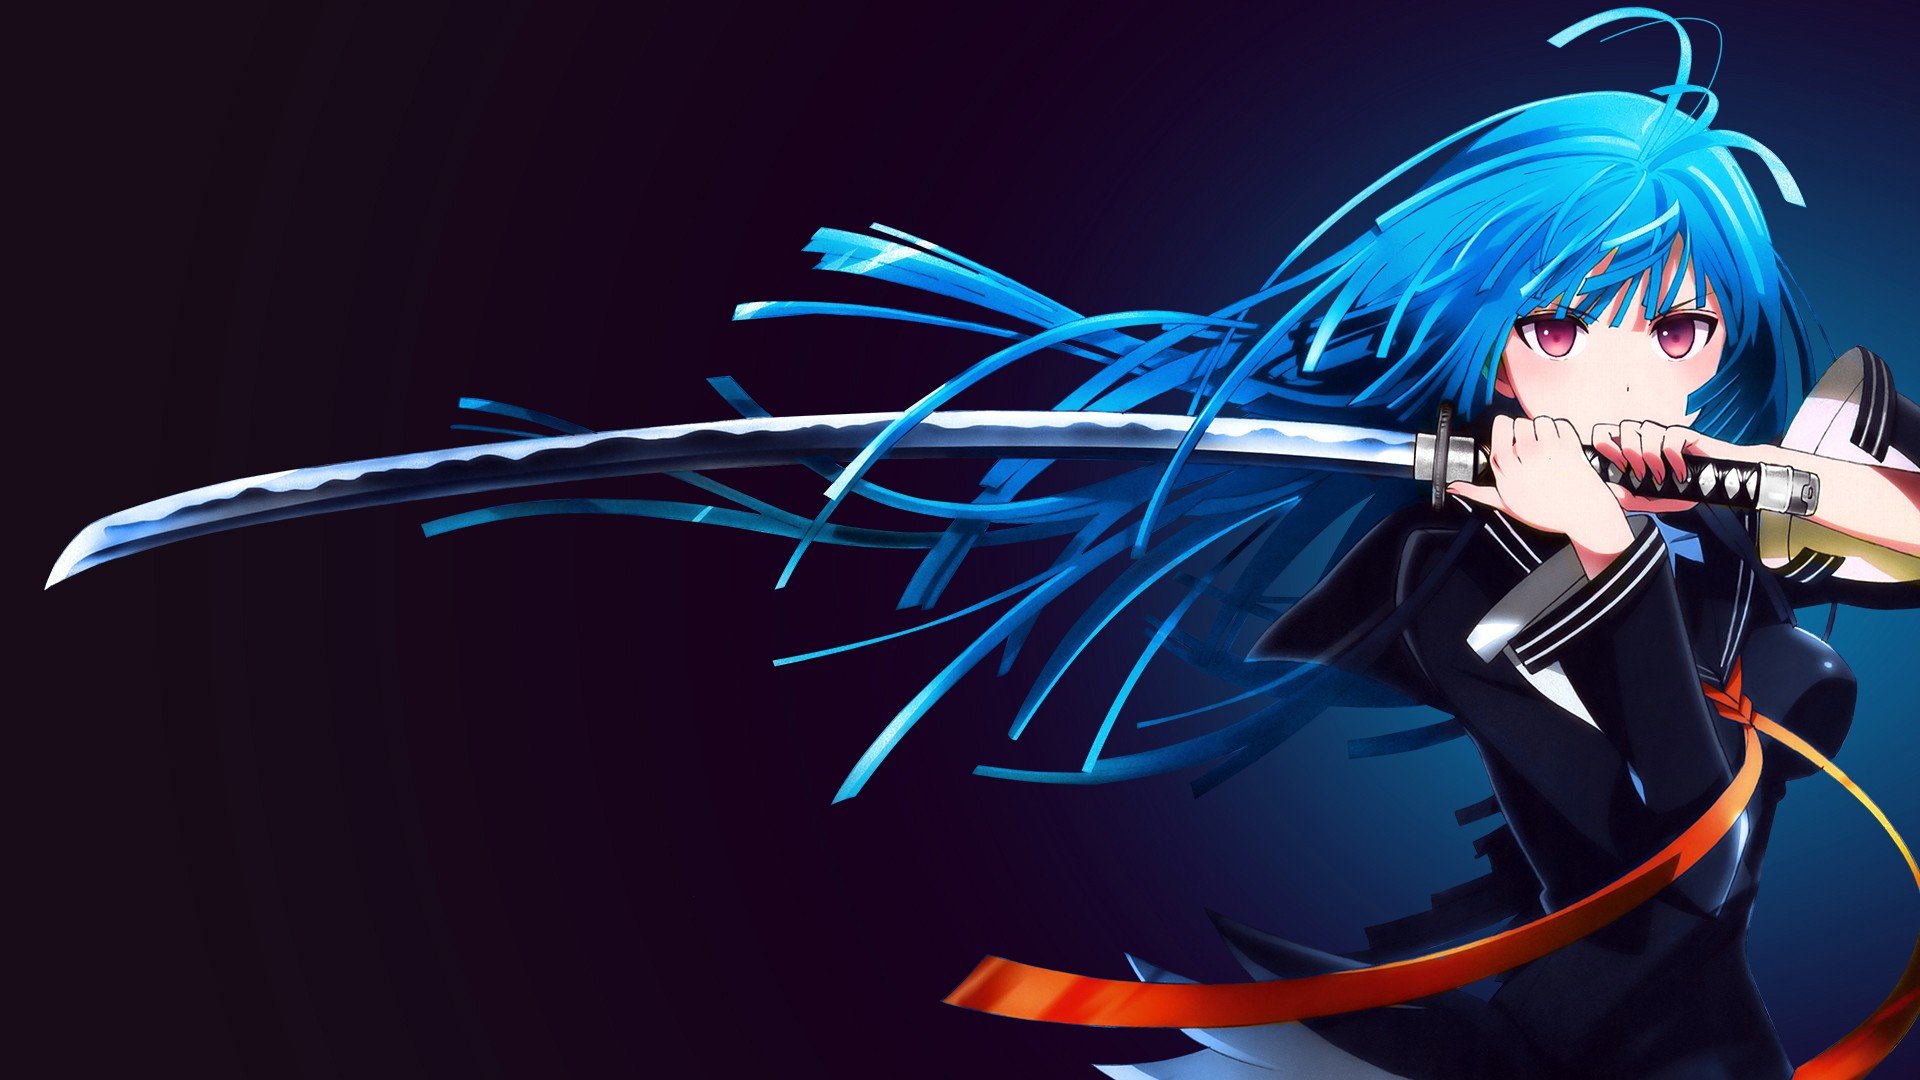 Anime Wallpapers Hd Desktop And Mobile Backgrounds